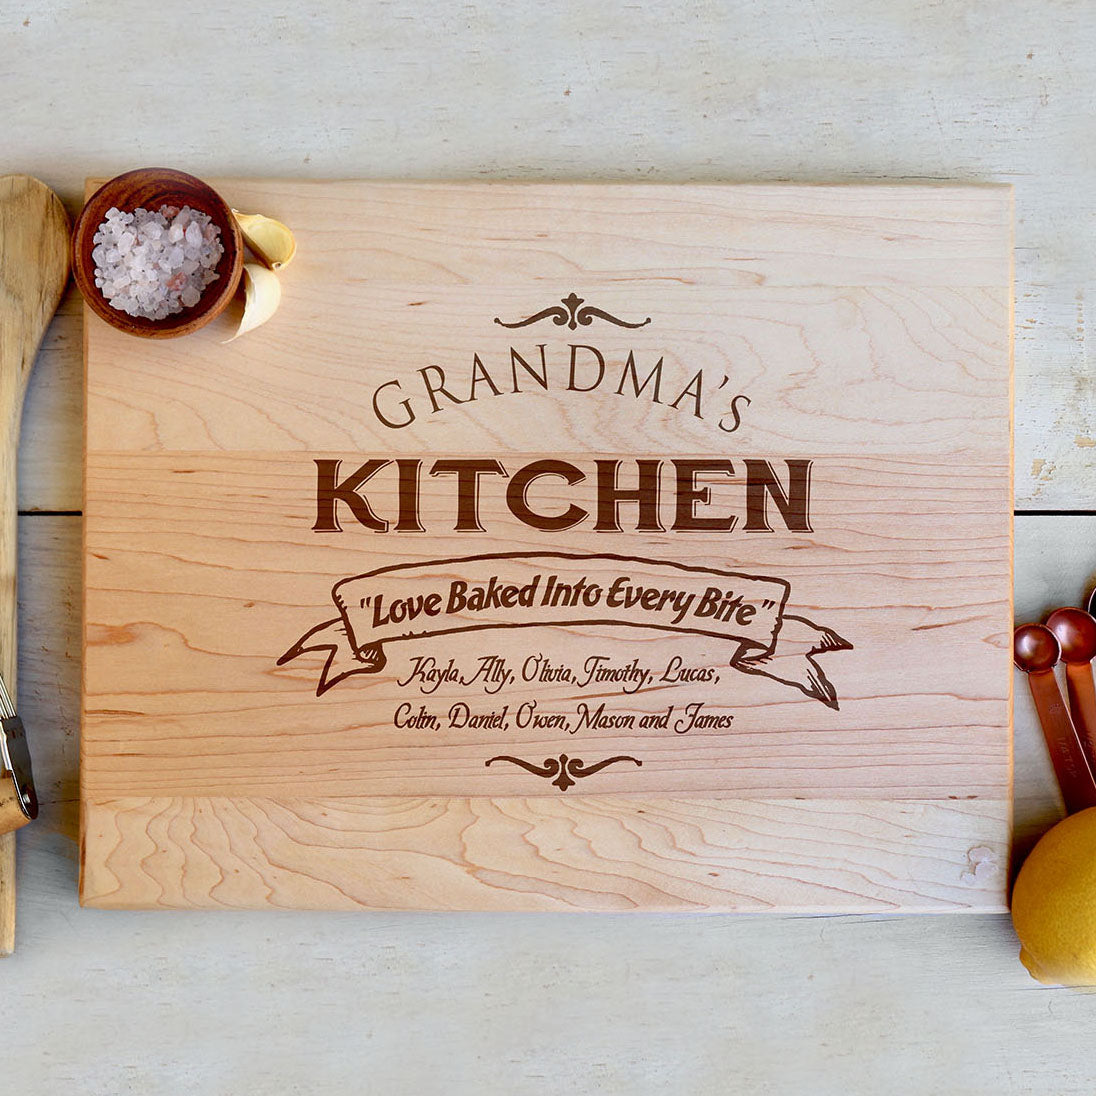 Cutting Board Grandma's Kitchen – Stamp Out